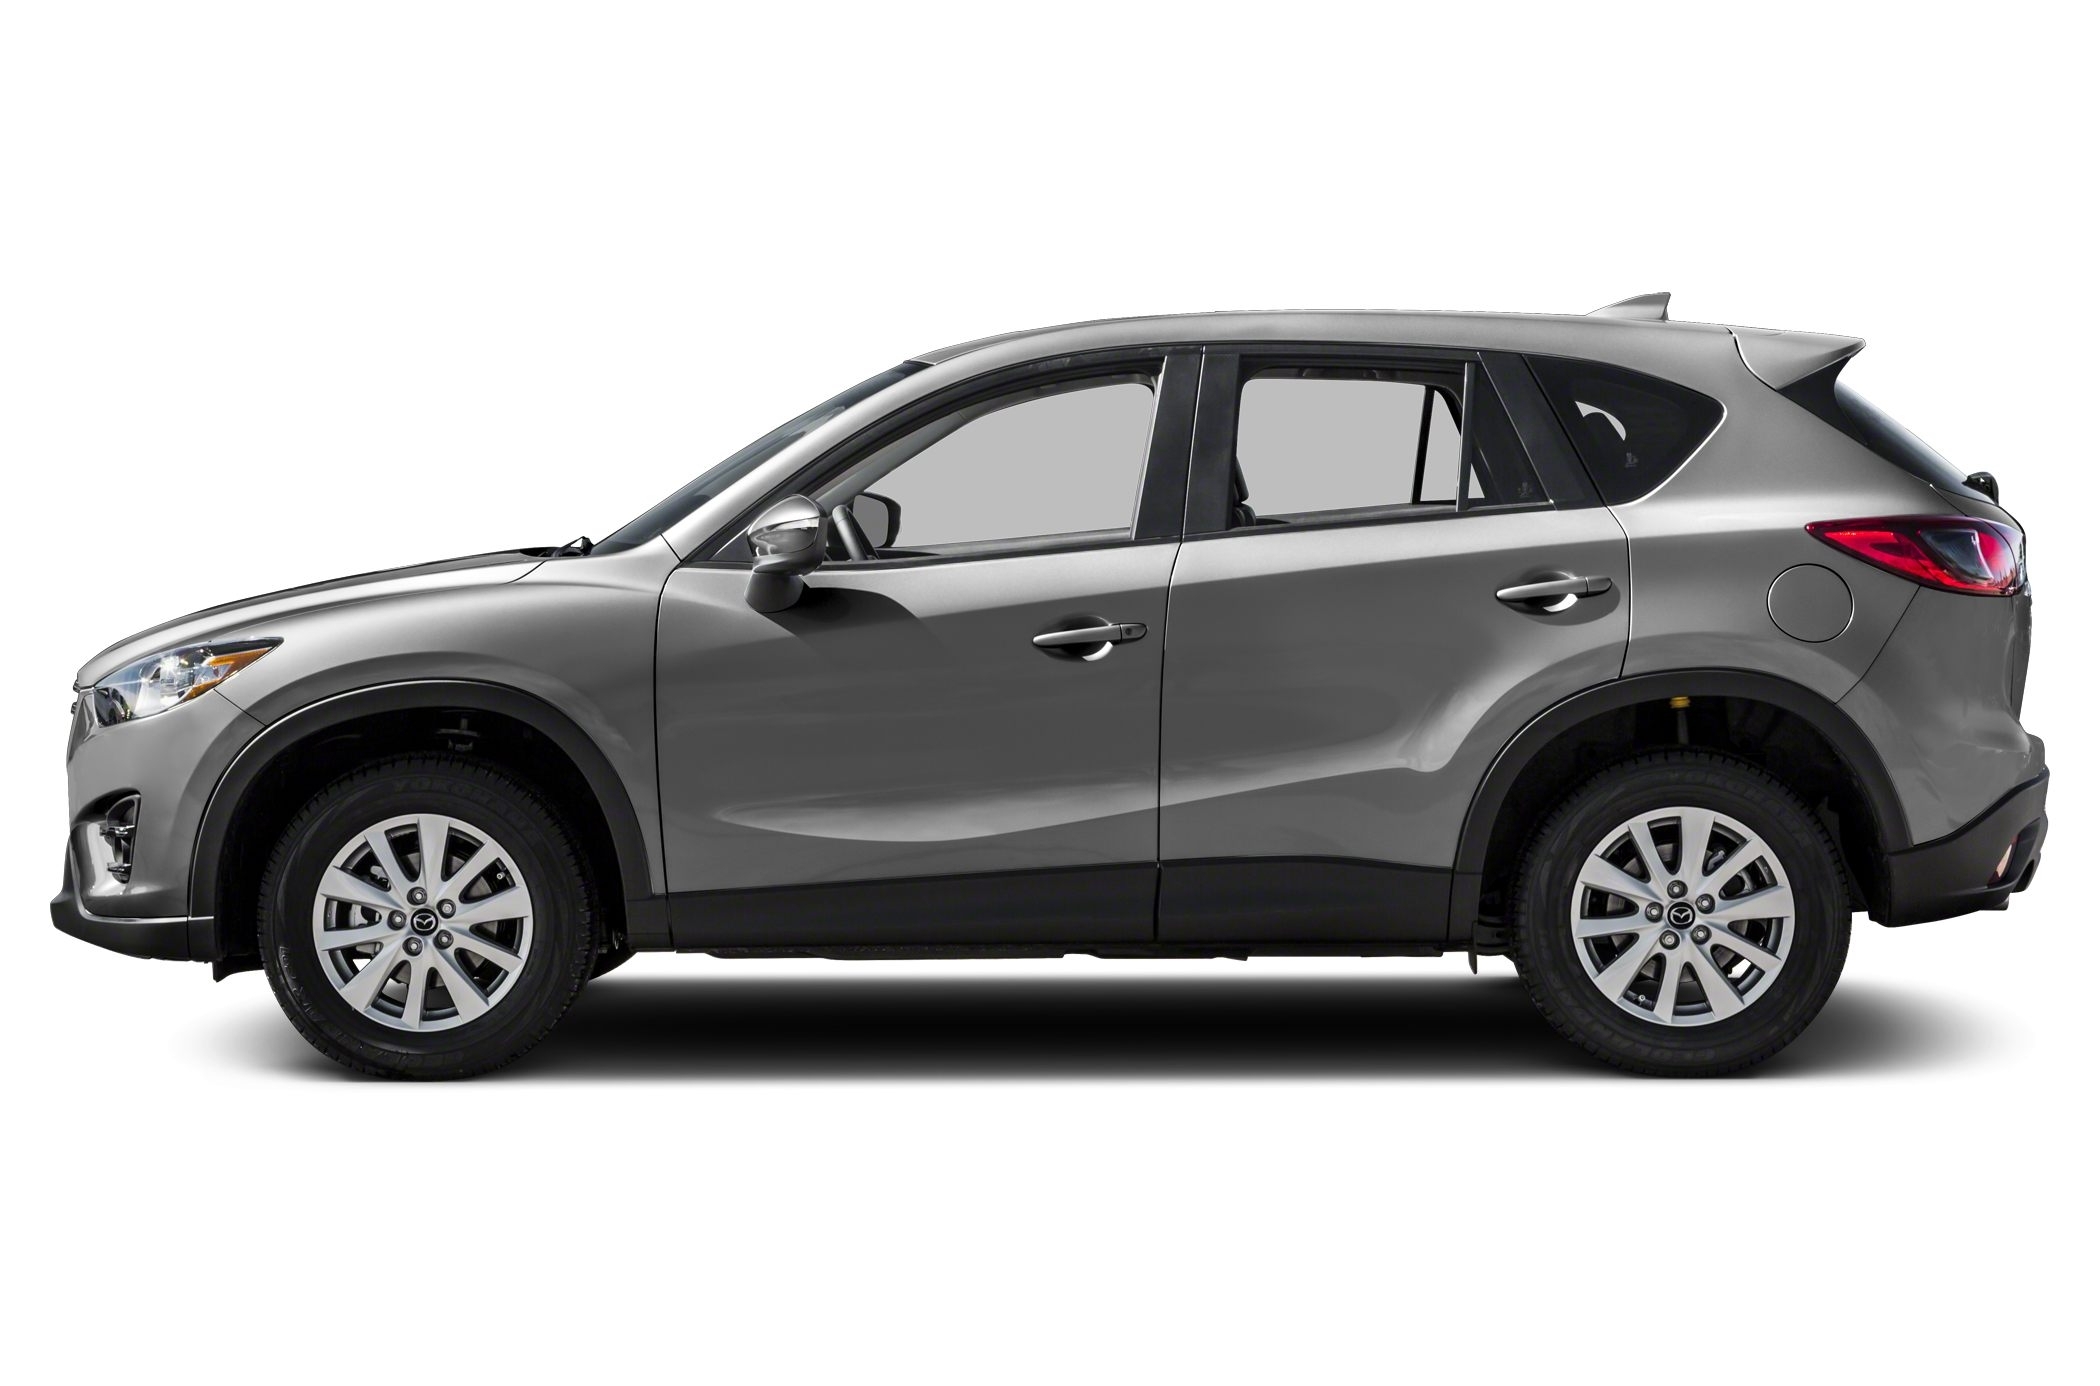 mazda cx5 invoice invoice price mazda cx 5 invoice template free 2016 2100 X 1386